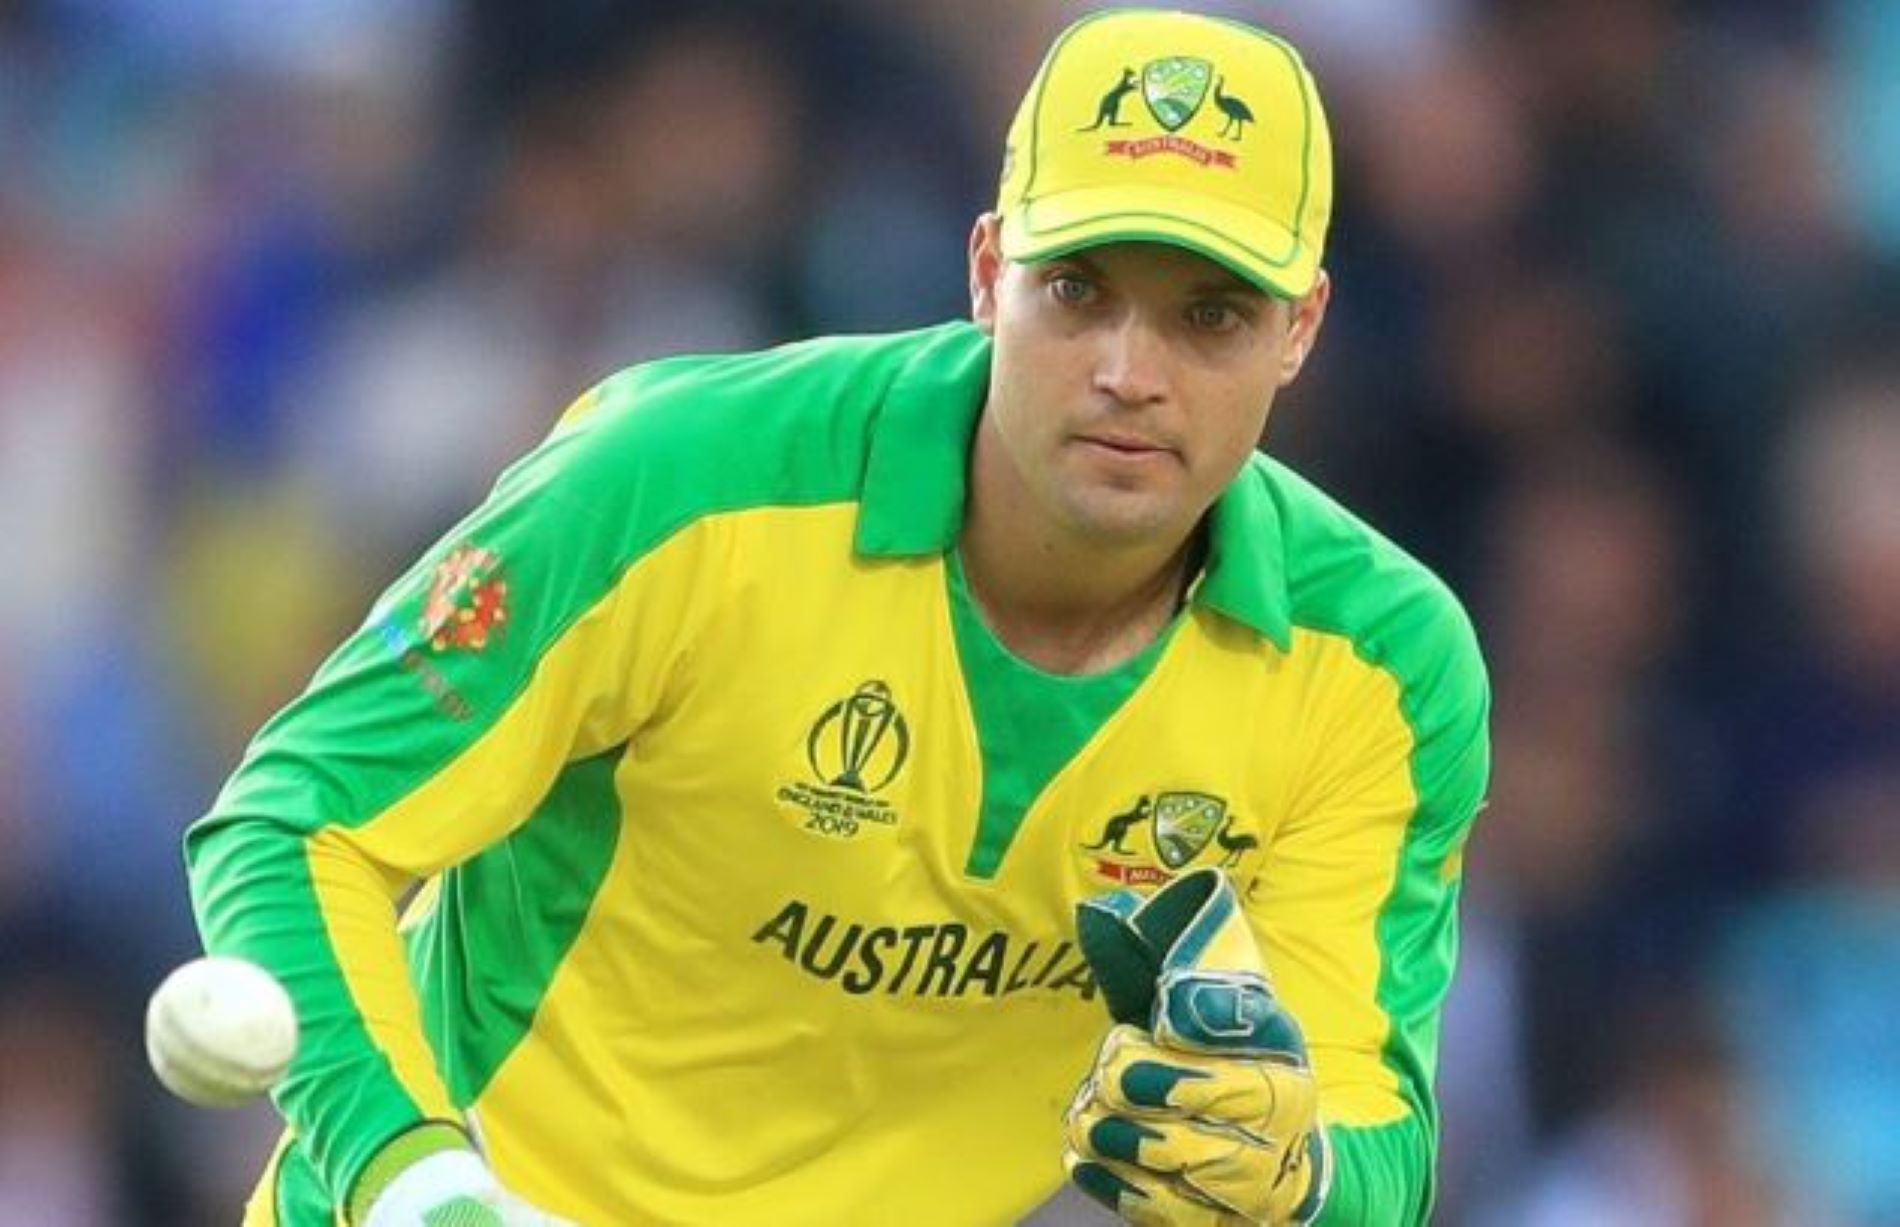 Carey has been in poor ODI form for Australia this year